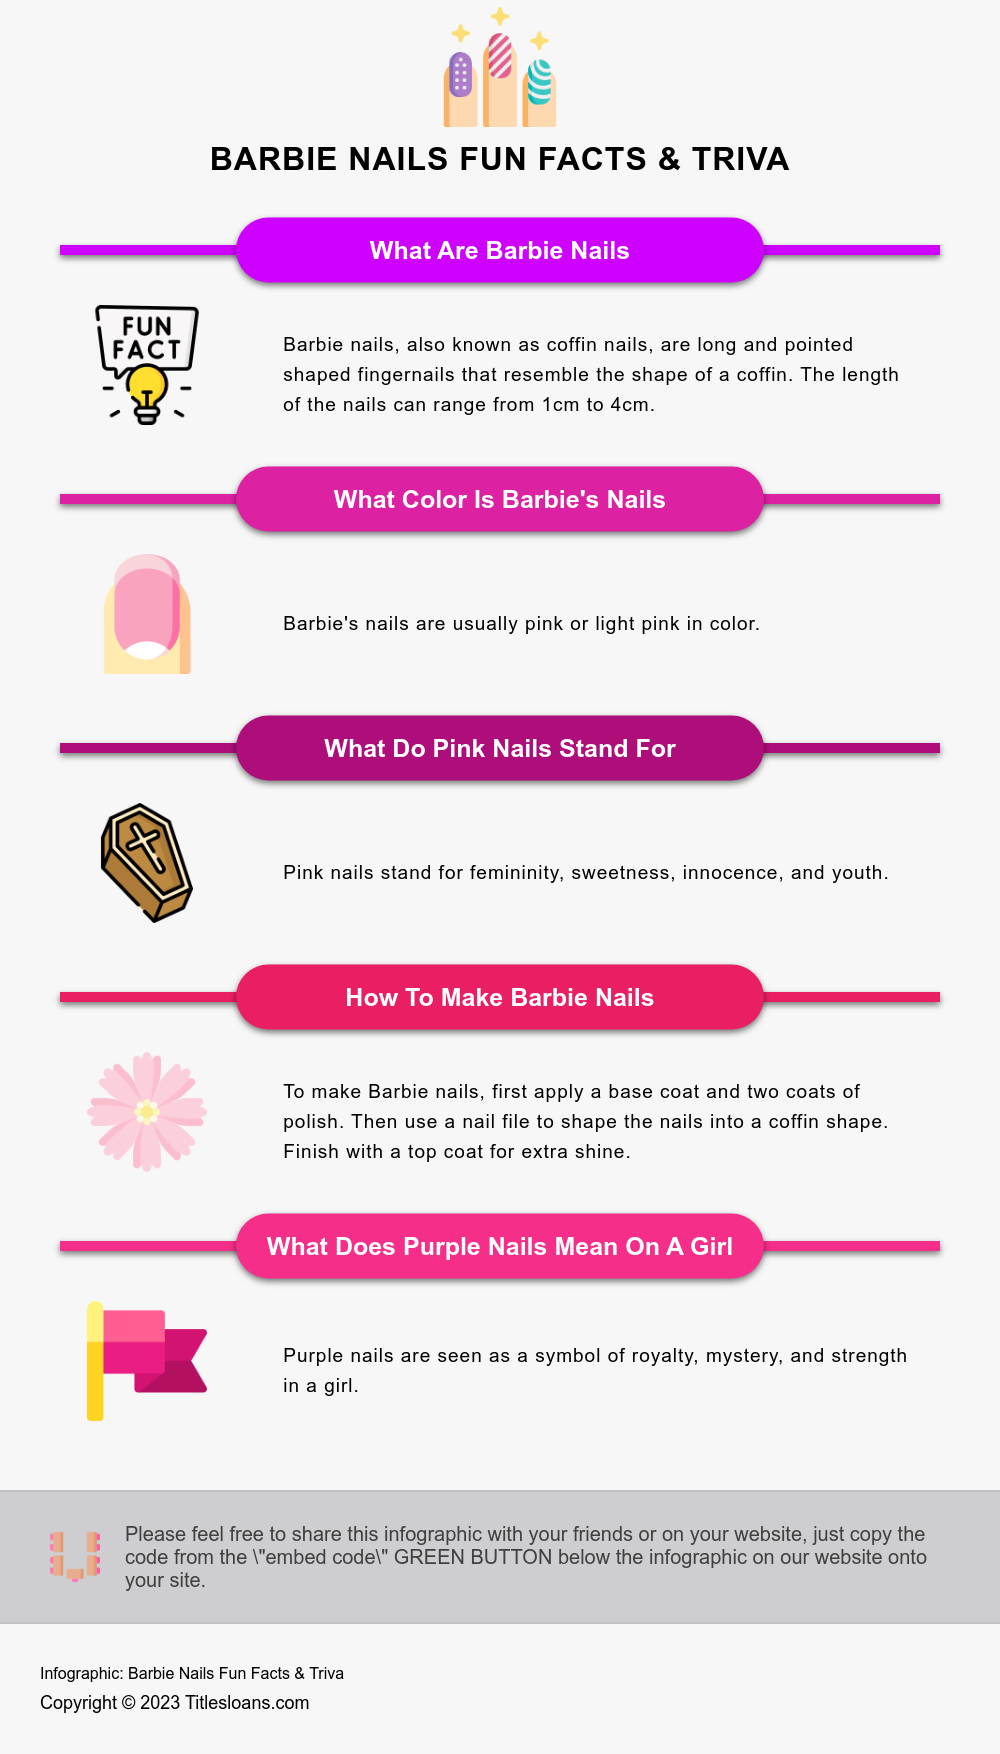 Infographic: Barbie Nails Fun Facts & Triva  